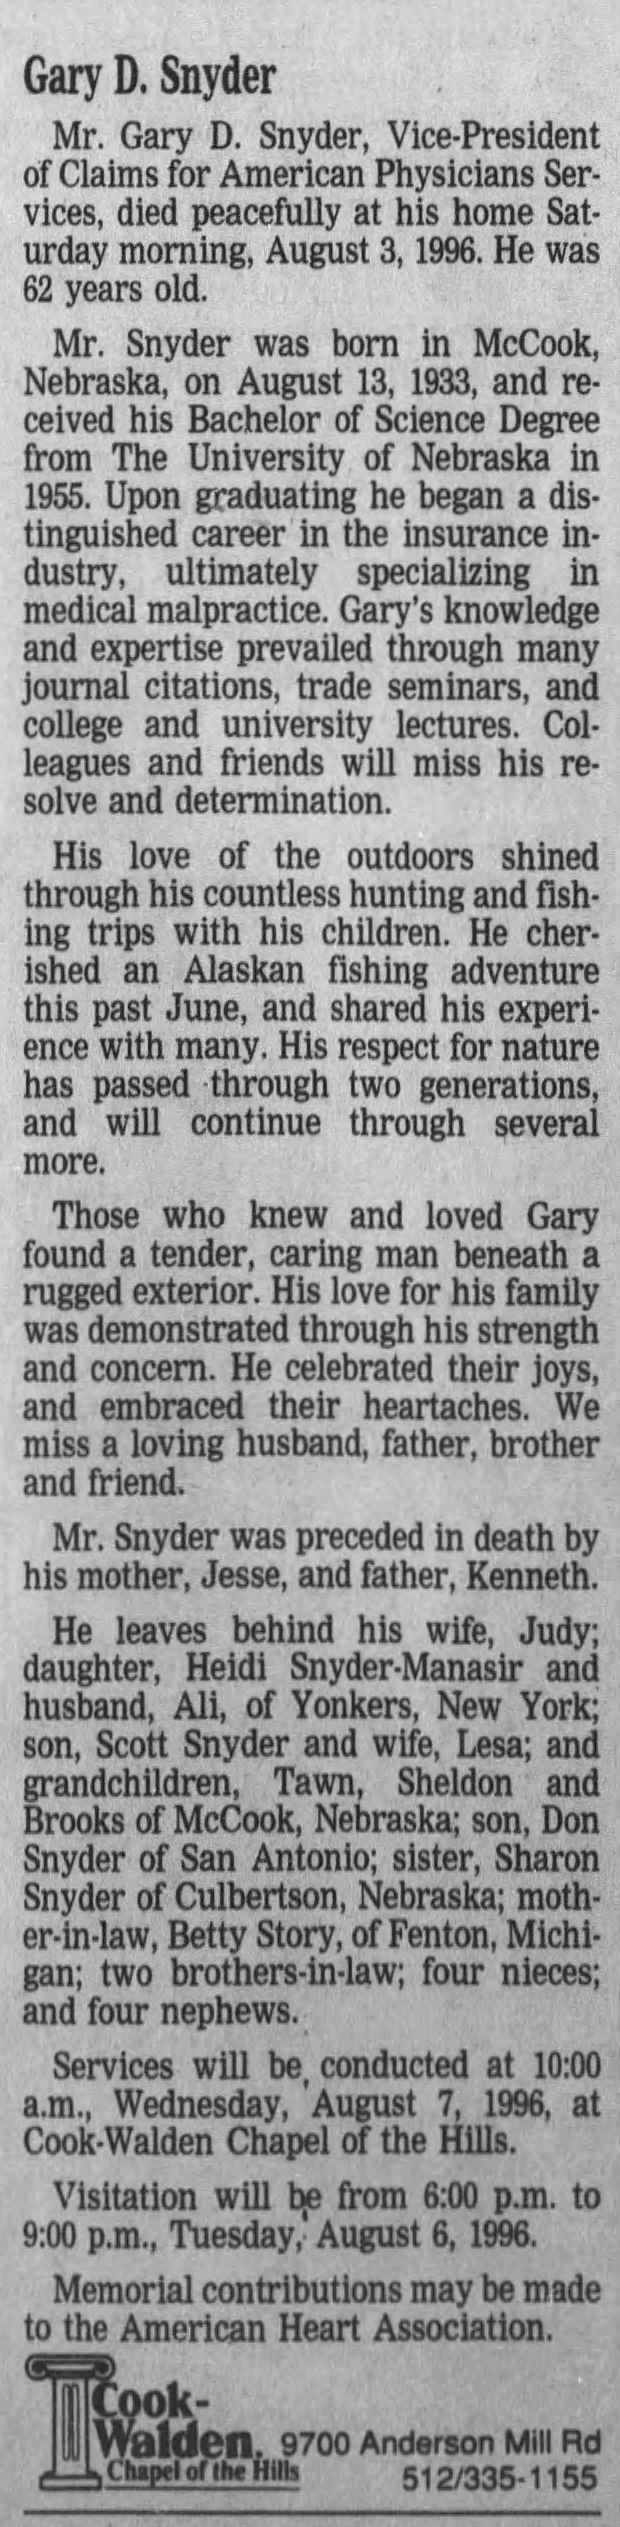 Obituary for Gary D. Snyder